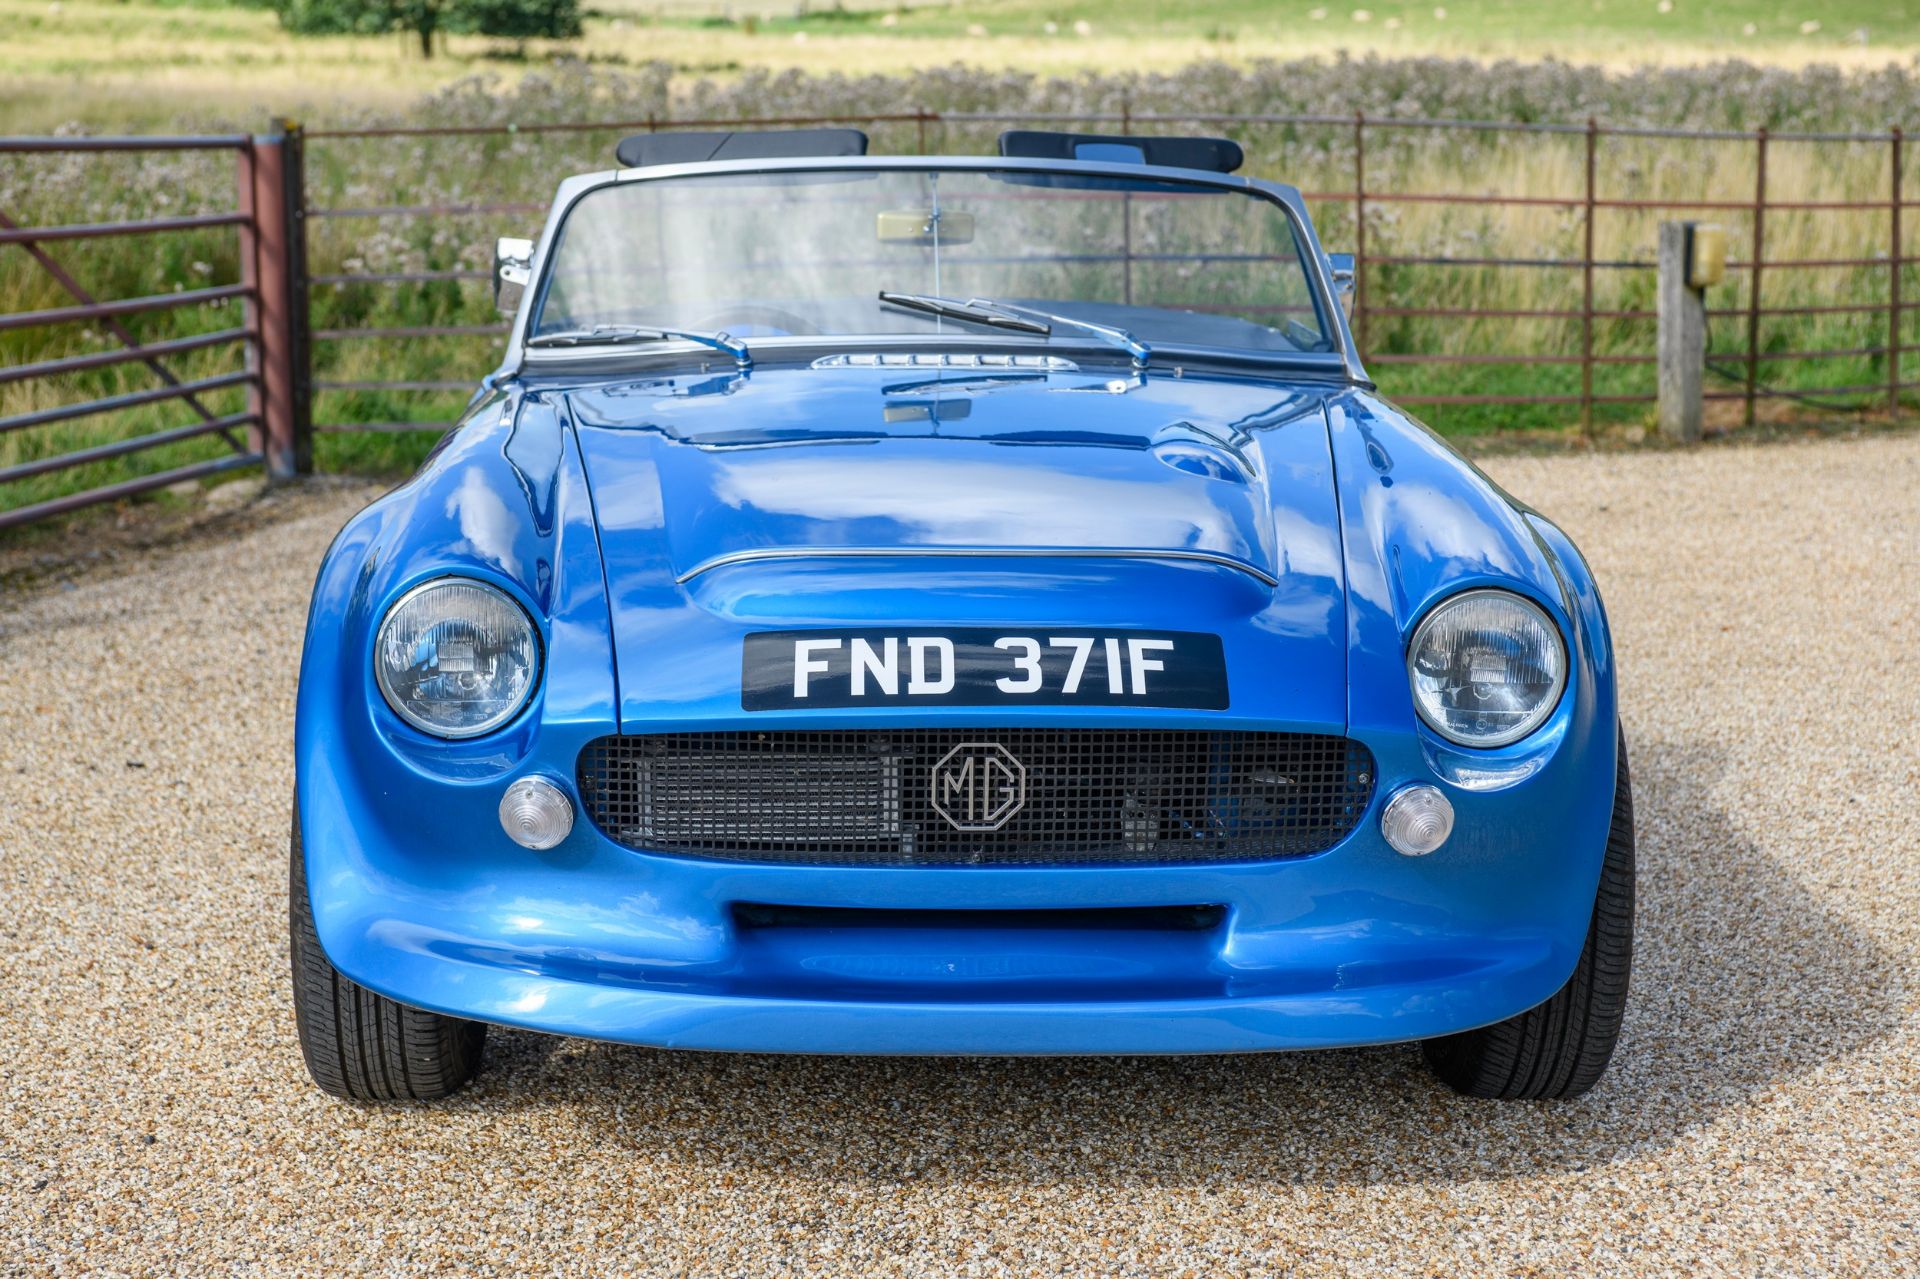 1968 MGC "THE MONSTER" Registration Number: FND 371F Chassis Number: GCN1U3953G - Converted in - Image 4 of 21